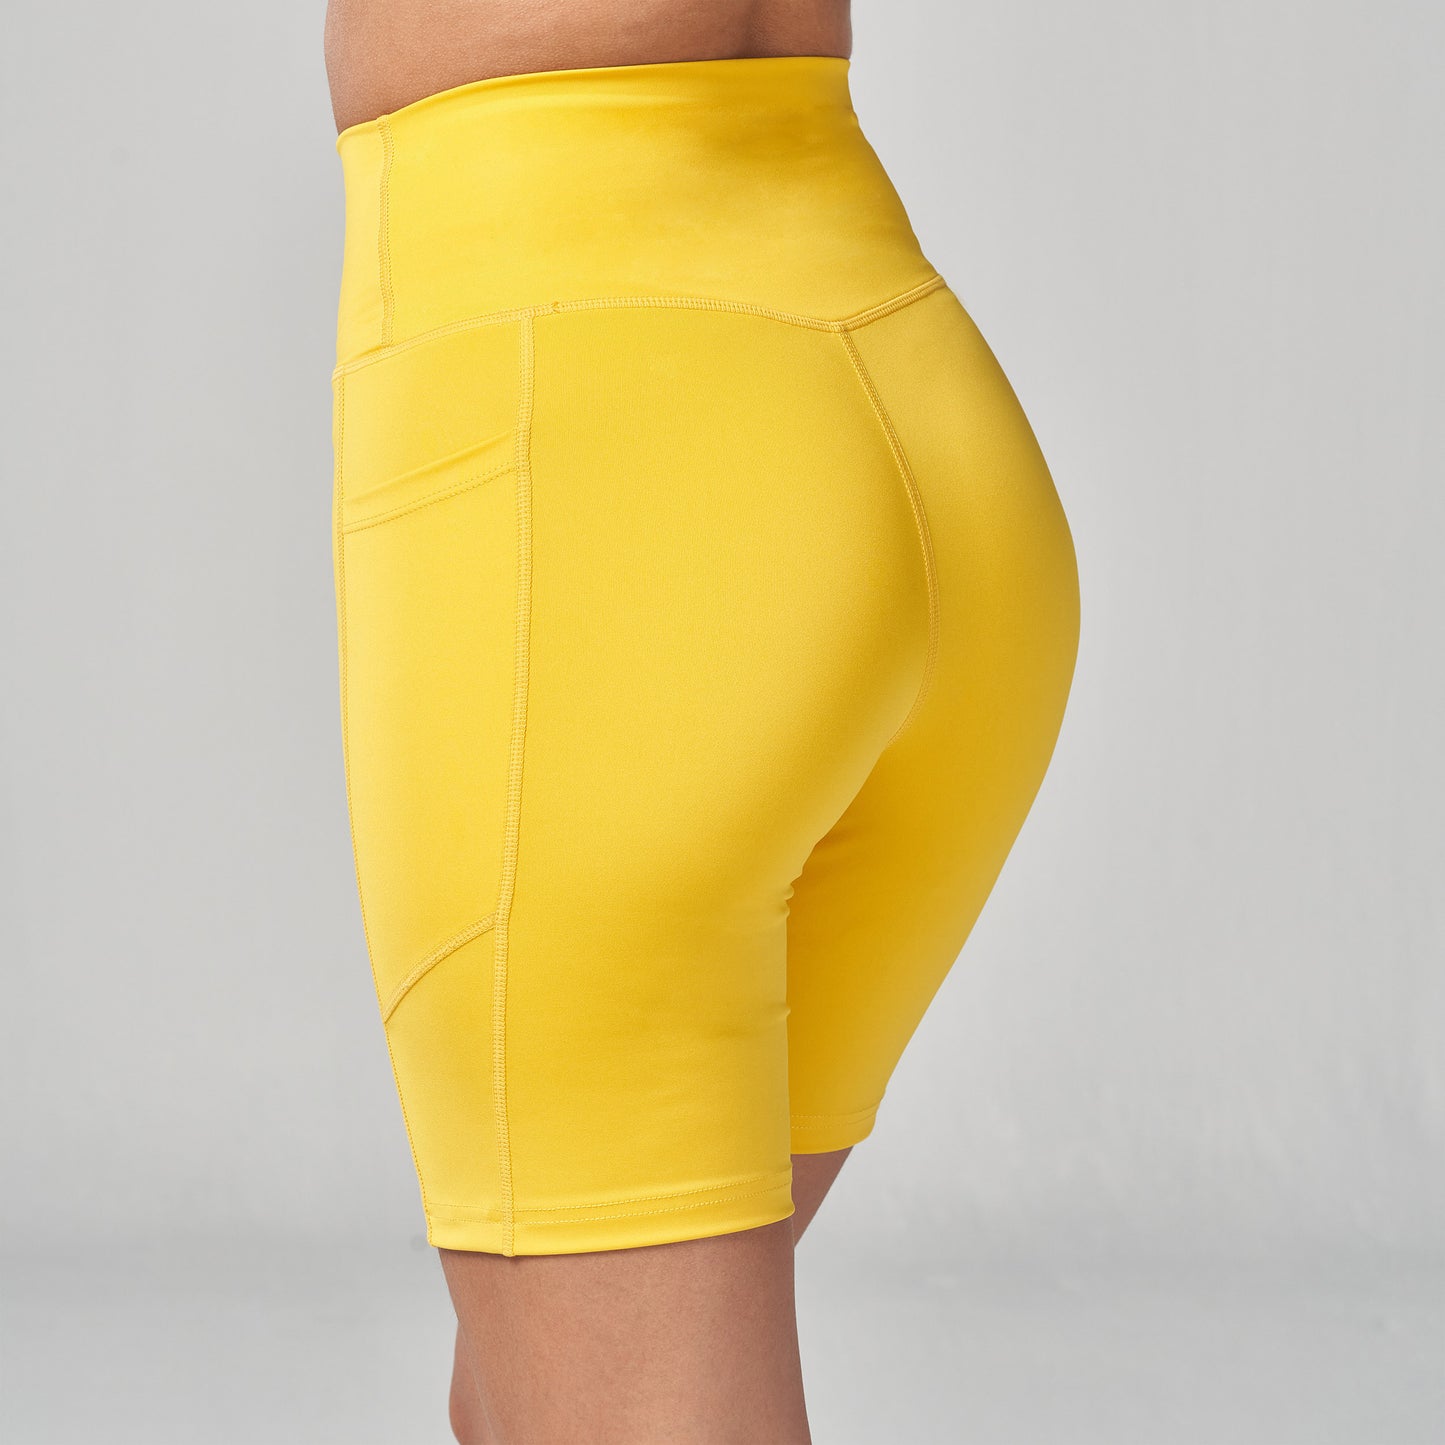 squatwolf-workout-clothes-essential-7-cycling-short-yellow-bike-shorts-women